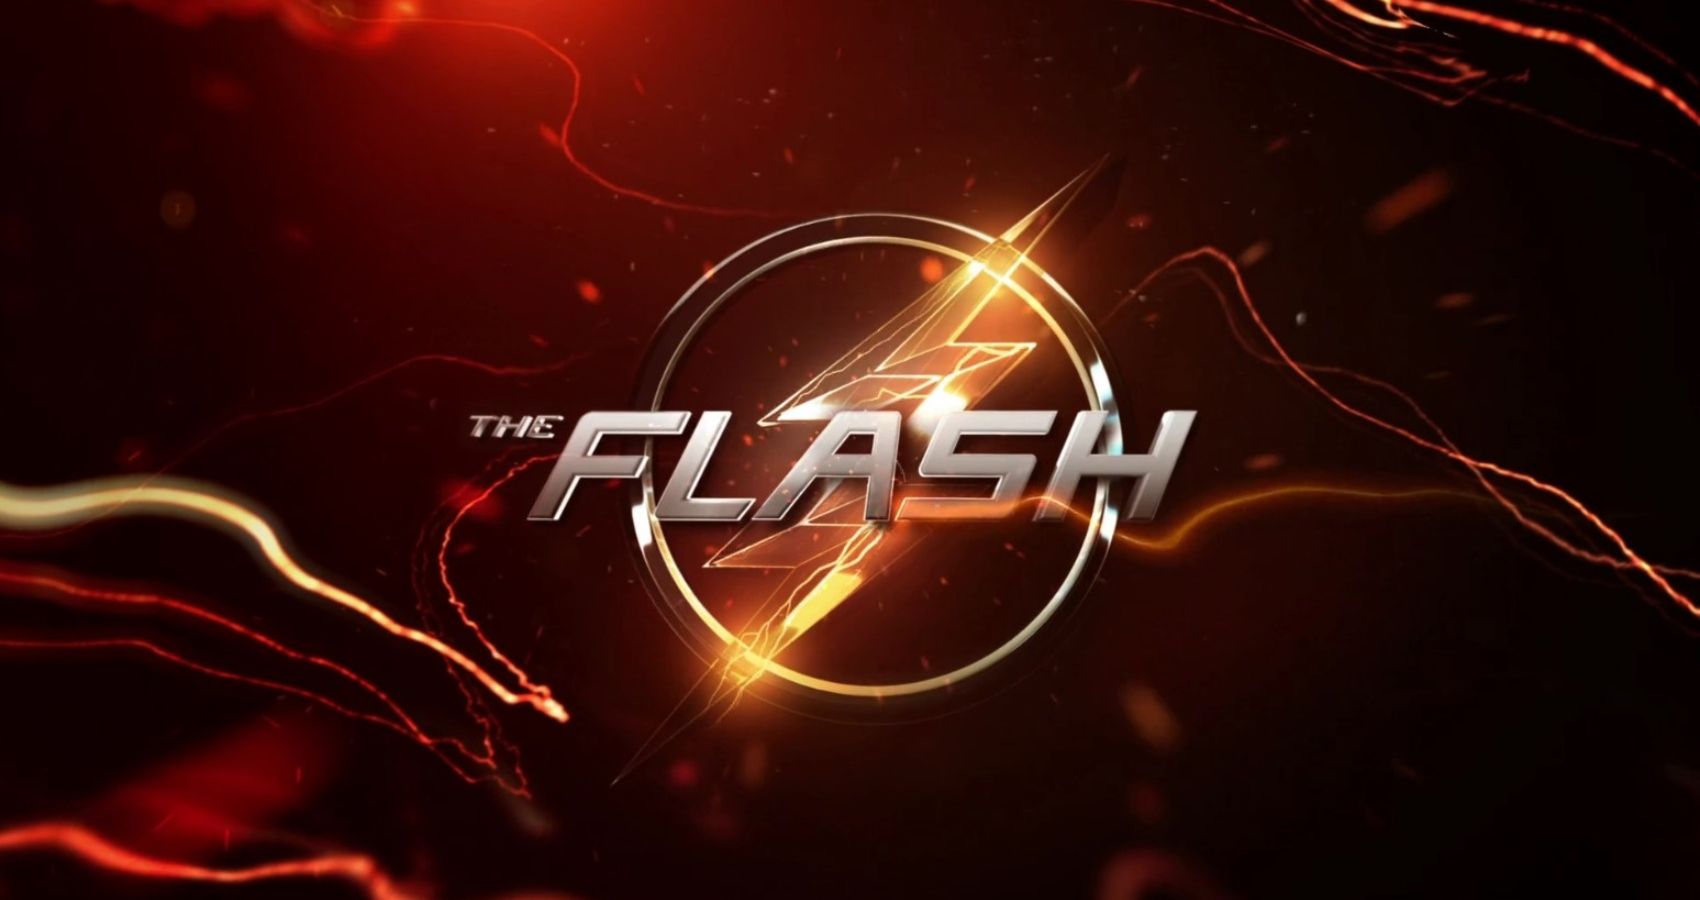 The Flash on The CW Logo